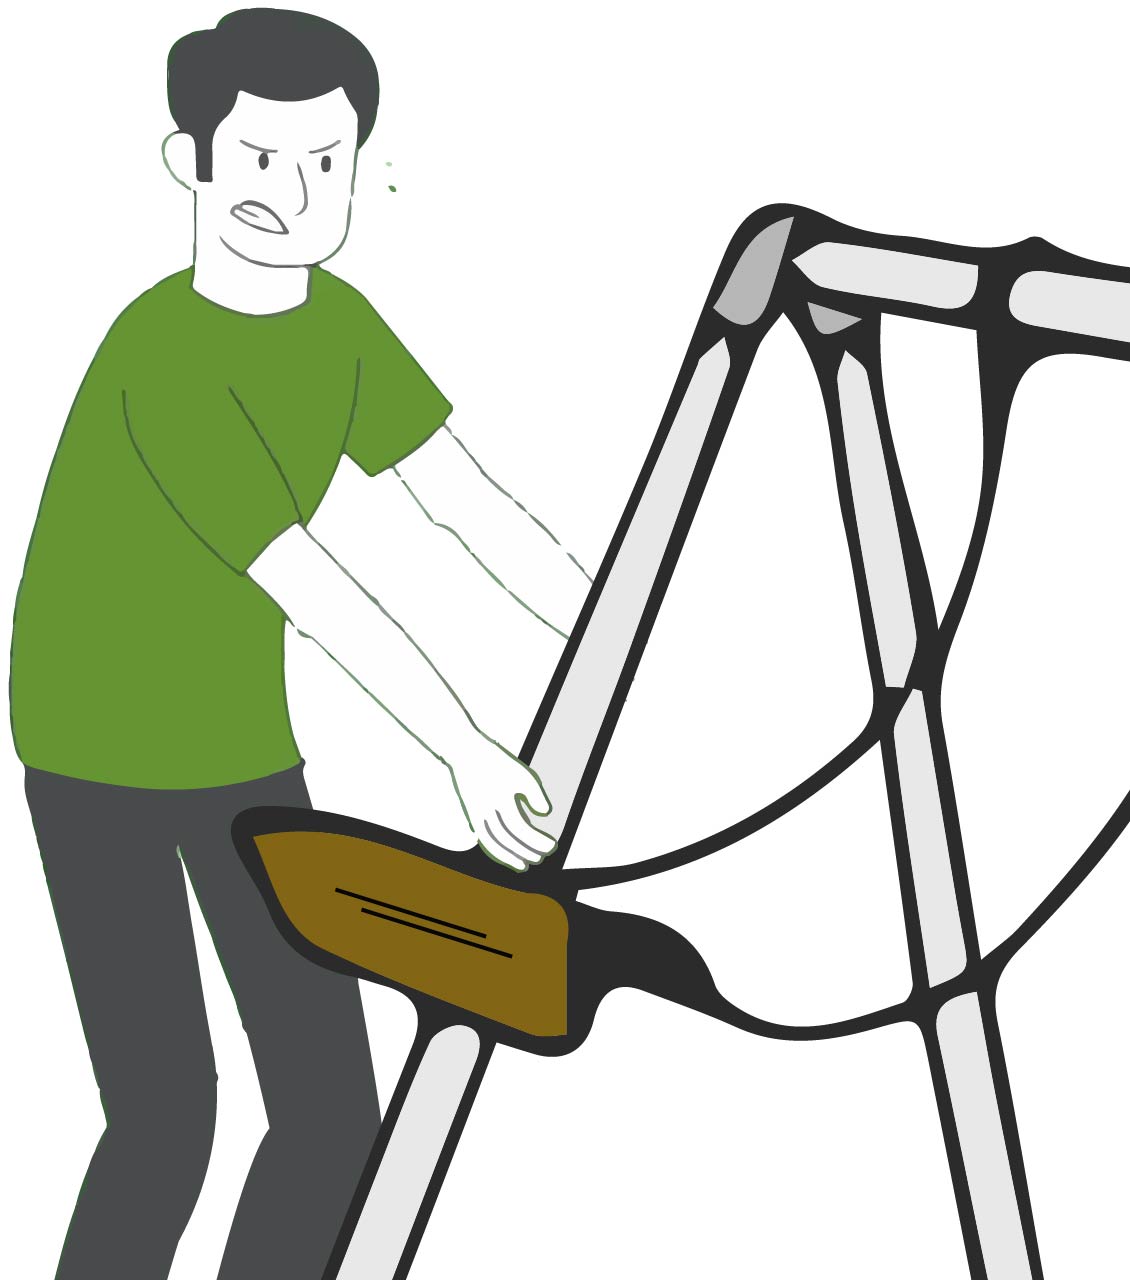 Swing Set Removal & Disposal Services